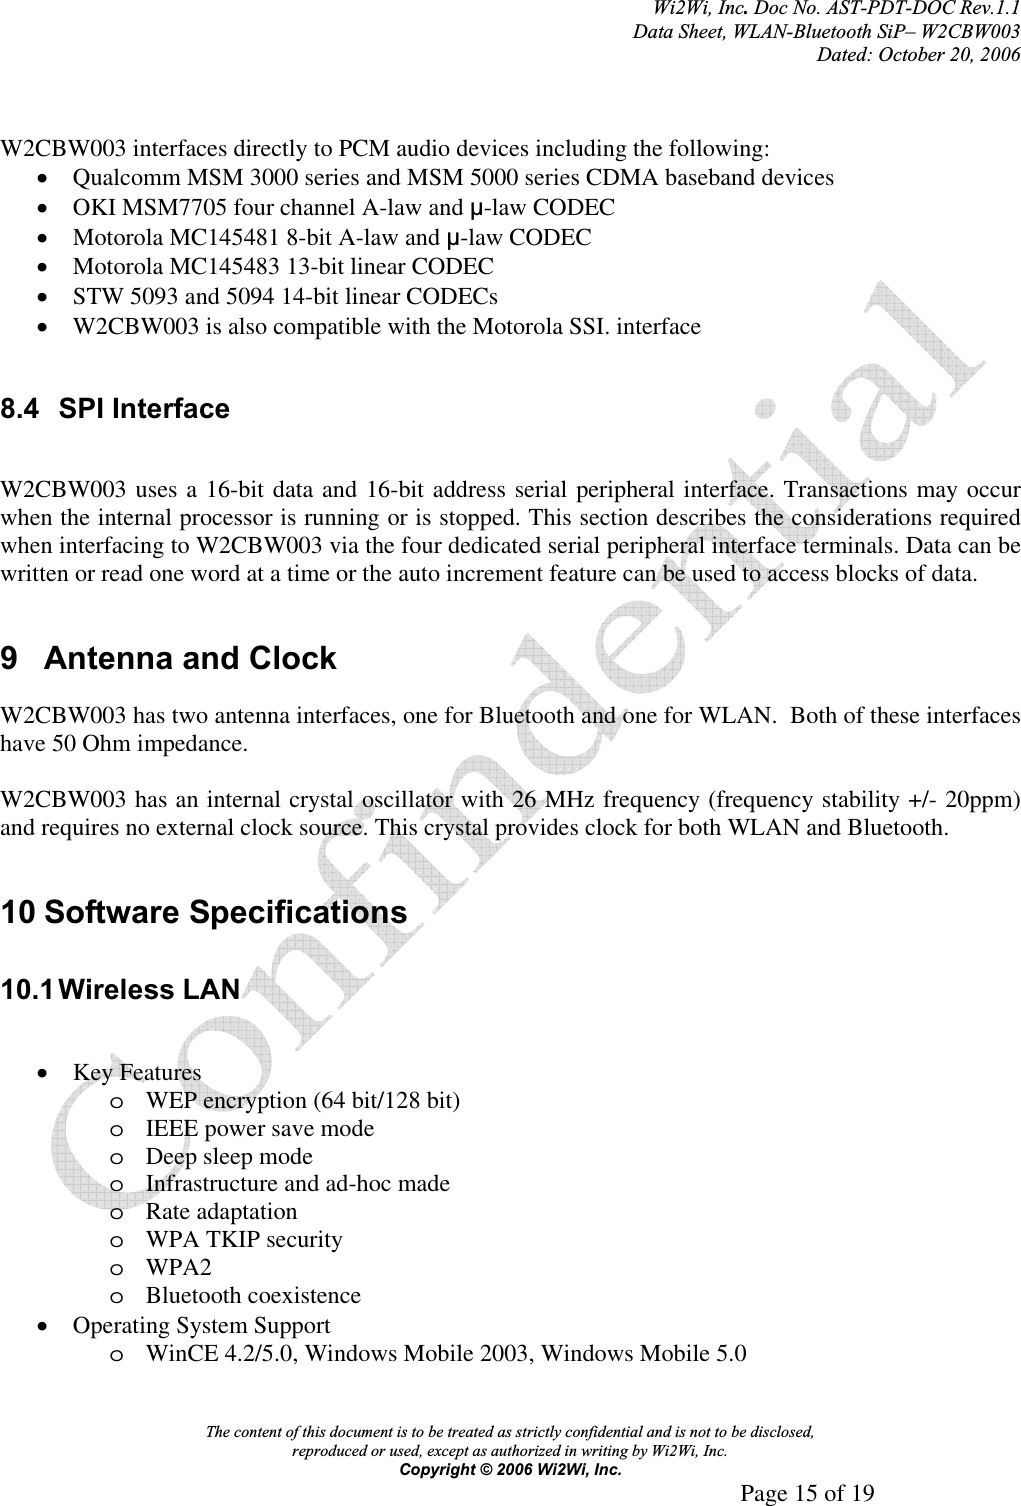 Wi2Wi, Inc.Doc No. AST-PDT-DOC Rev.1.1  Data Sheet, WLAN-Bluetooth SiP– W2CBW003 Dated: October 20, 2006 The content of this document is to be treated as strictly confidential and is not to be disclosed,  reproduced or used, except as authorized in writing by Wi2Wi, Inc.  Copyright © 2006 Wi2Wi, Inc.     Page 15 of 19   W2CBW003 interfaces directly to PCM audio devices including the following: xQualcomm MSM 3000 series and MSM 5000 series CDMA baseband devices xOKI MSM7705 four channel A-law and ȝ-law CODEC xMotorola MC145481 8-bit A-law and ȝ-law CODEC xMotorola MC145483 13-bit linear CODEC xSTW 5093 and 5094 14-bit linear CODECs xW2CBW003 is also compatible with the Motorola SSI. interface 8.4 SPI Interface W2CBW003 uses a 16-bit data and 16-bit address serial peripheral interface. Transactions may occur when the internal processor is running or is stopped. This section describes the considerations required when interfacing to W2CBW003 via the four dedicated serial peripheral interface terminals. Data can be written or read one word at a time or the auto increment feature can be used to access blocks of data. 9  Antenna and Clock W2CBW003 has two antenna interfaces, one for Bluetooth and one for WLAN.  Both of these interfaces have 50 Ohm impedance. W2CBW003 has an internal crystal oscillator with 26 MHz frequency (frequency stability +/- 20ppm) and requires no external clock source. This crystal provides clock for both WLAN and Bluetooth.  10 Software Specifications 10.1 Wireless  LAN xKey Features oWEP encryption (64 bit/128 bit) oIEEE power save mode oDeep sleep mode oInfrastructure and ad-hoc made oRate adaptation oWPA TKIP security oWPA2oBluetooth coexistence xOperating System Support oWinCE 4.2/5.0, Windows Mobile 2003, Windows Mobile 5.0 